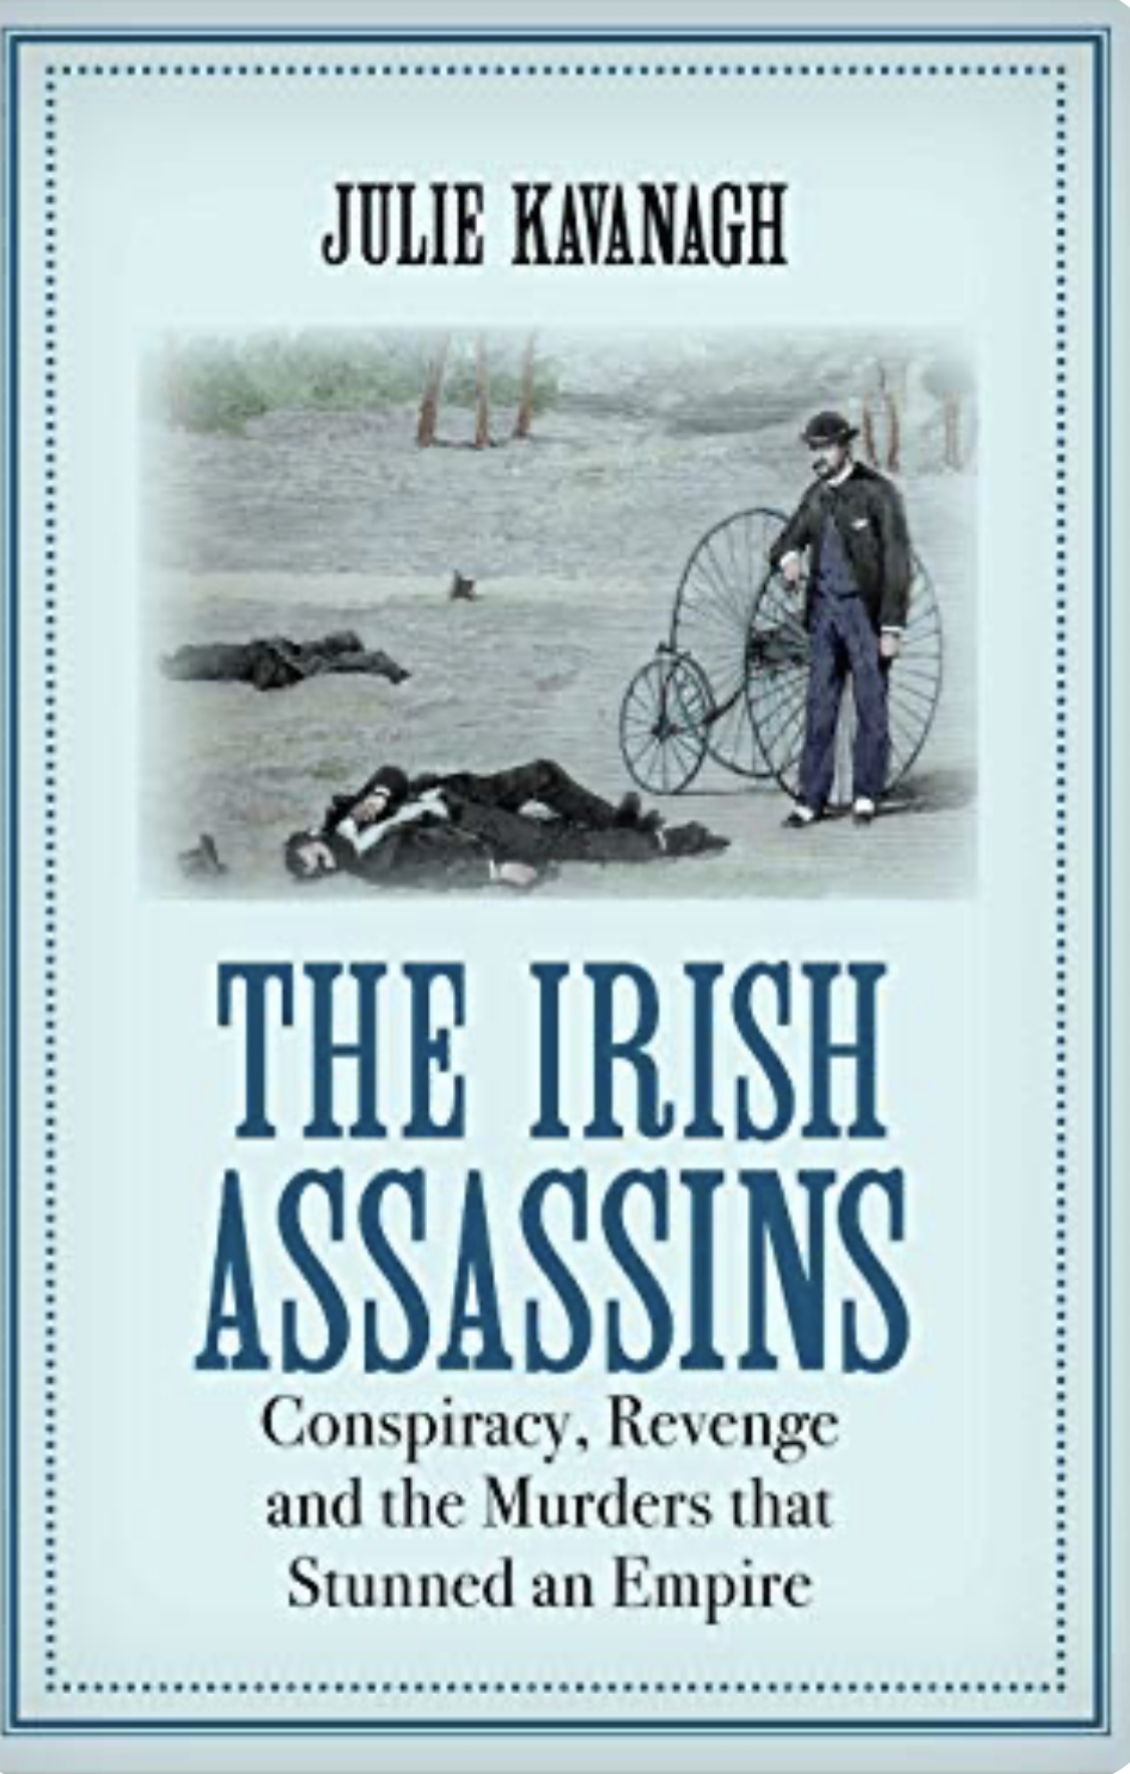 Review: The Irish Assassins: Conspiracy, Revenge and the Murders that Stunned an Empire